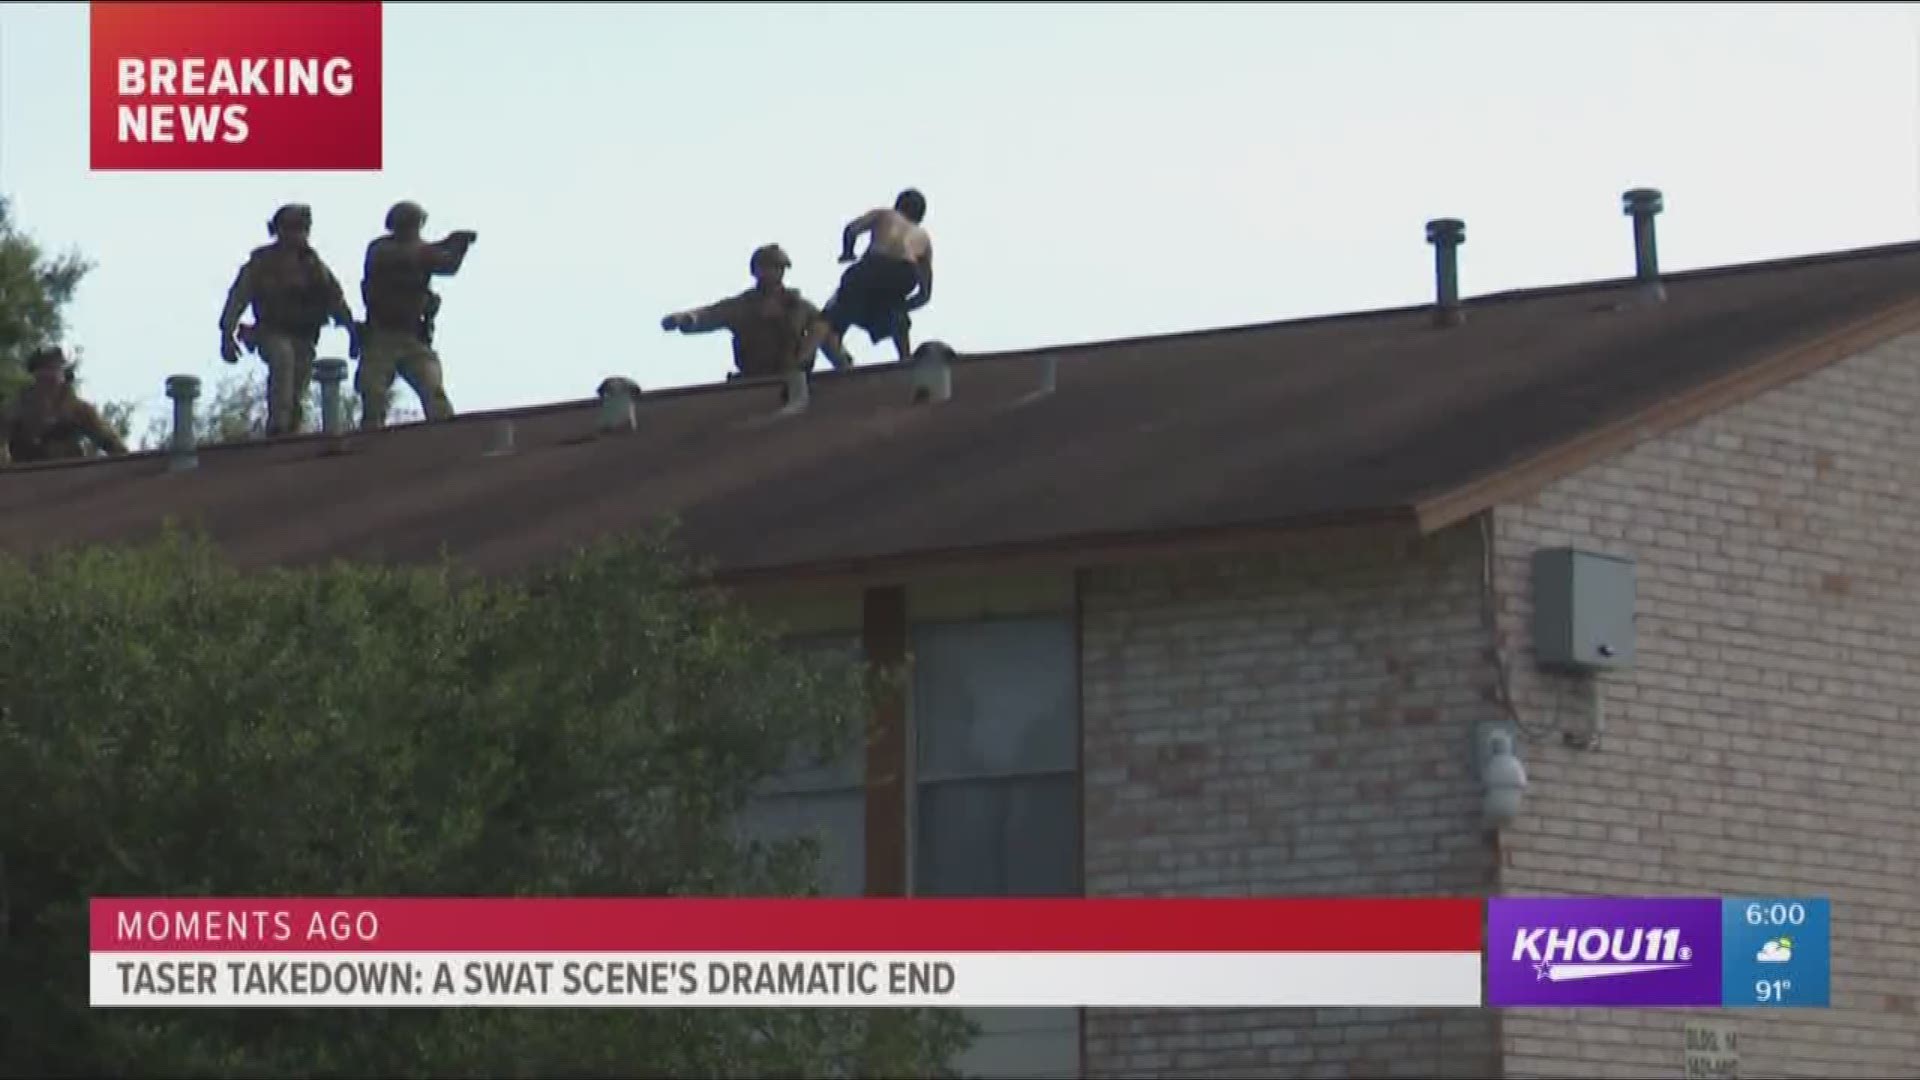 Taser takedown after man refuses to come down from roof
Remains at Fort Bend county construction site
Weekend weather forecast